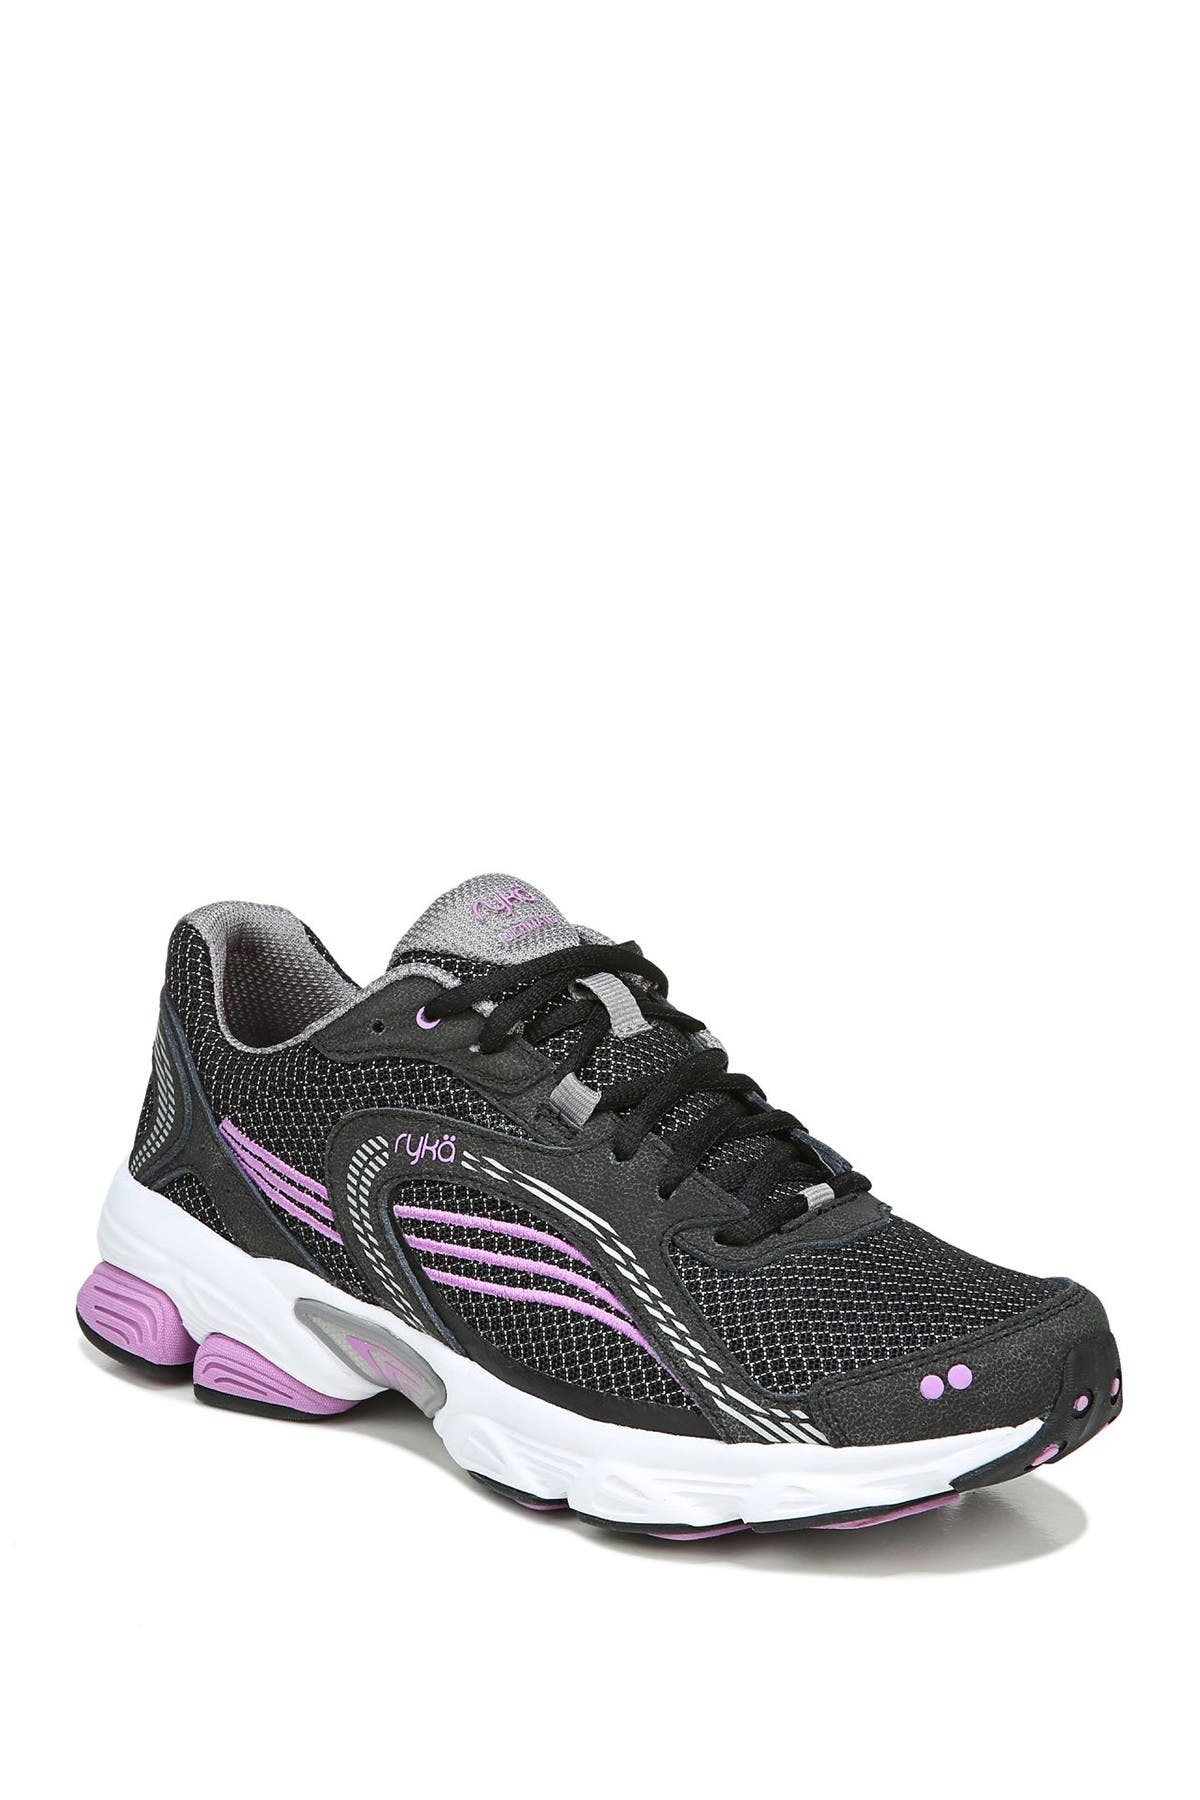 Ryka | Ultimate Running Shoe - Wide Width Available | Nordstrom Rack